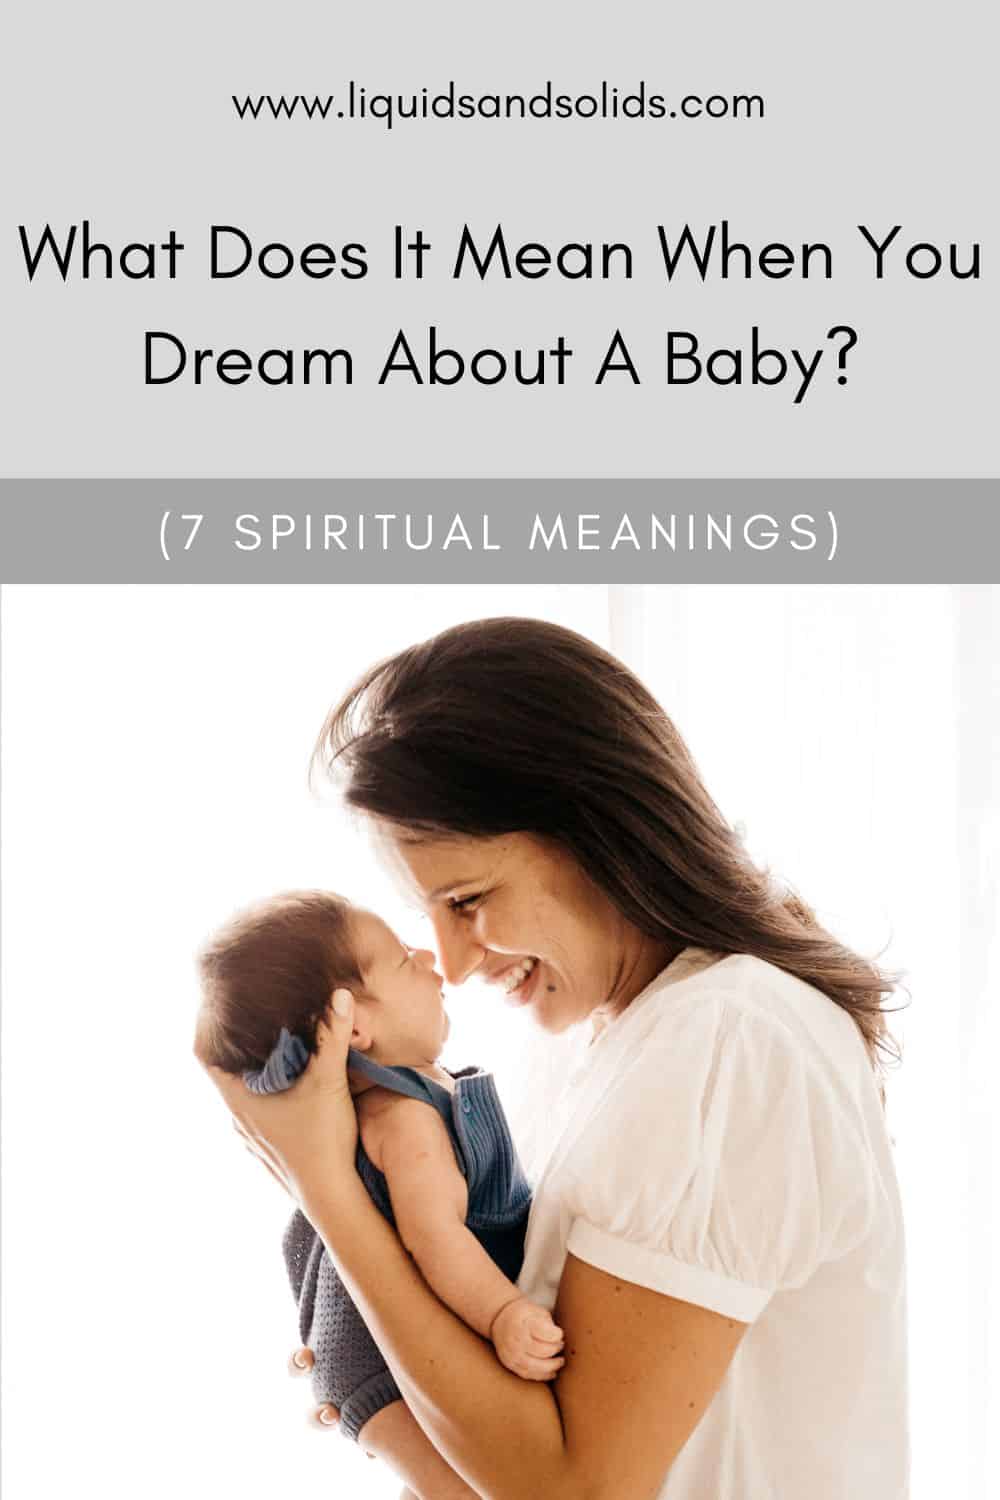 What Does It Mean When You Dream About A Baby? (7 Spiritual Meanings)